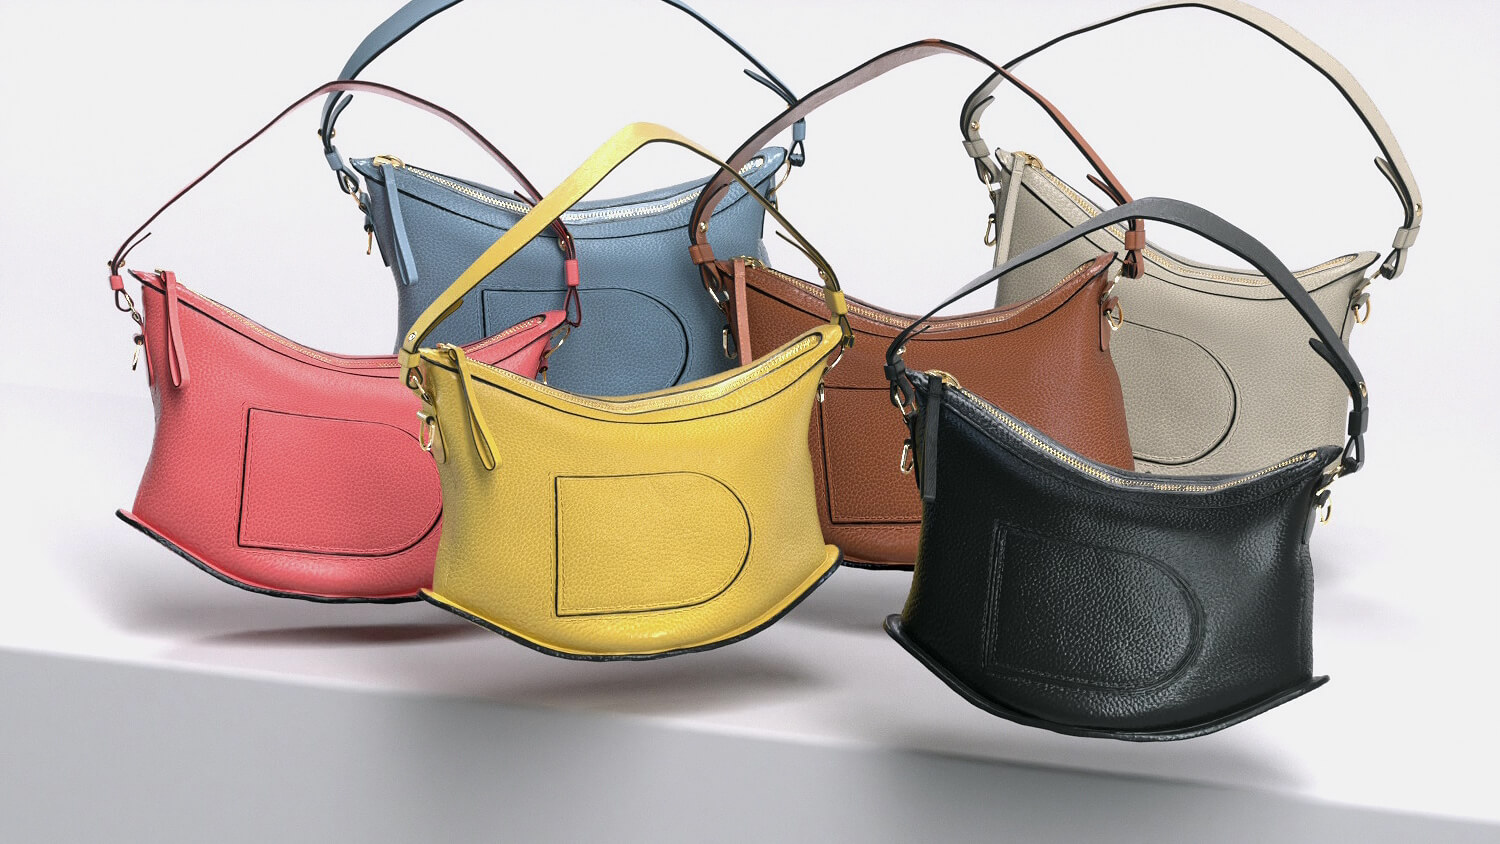 Harbour City - Delvaux's new Pin Swing bag is the final